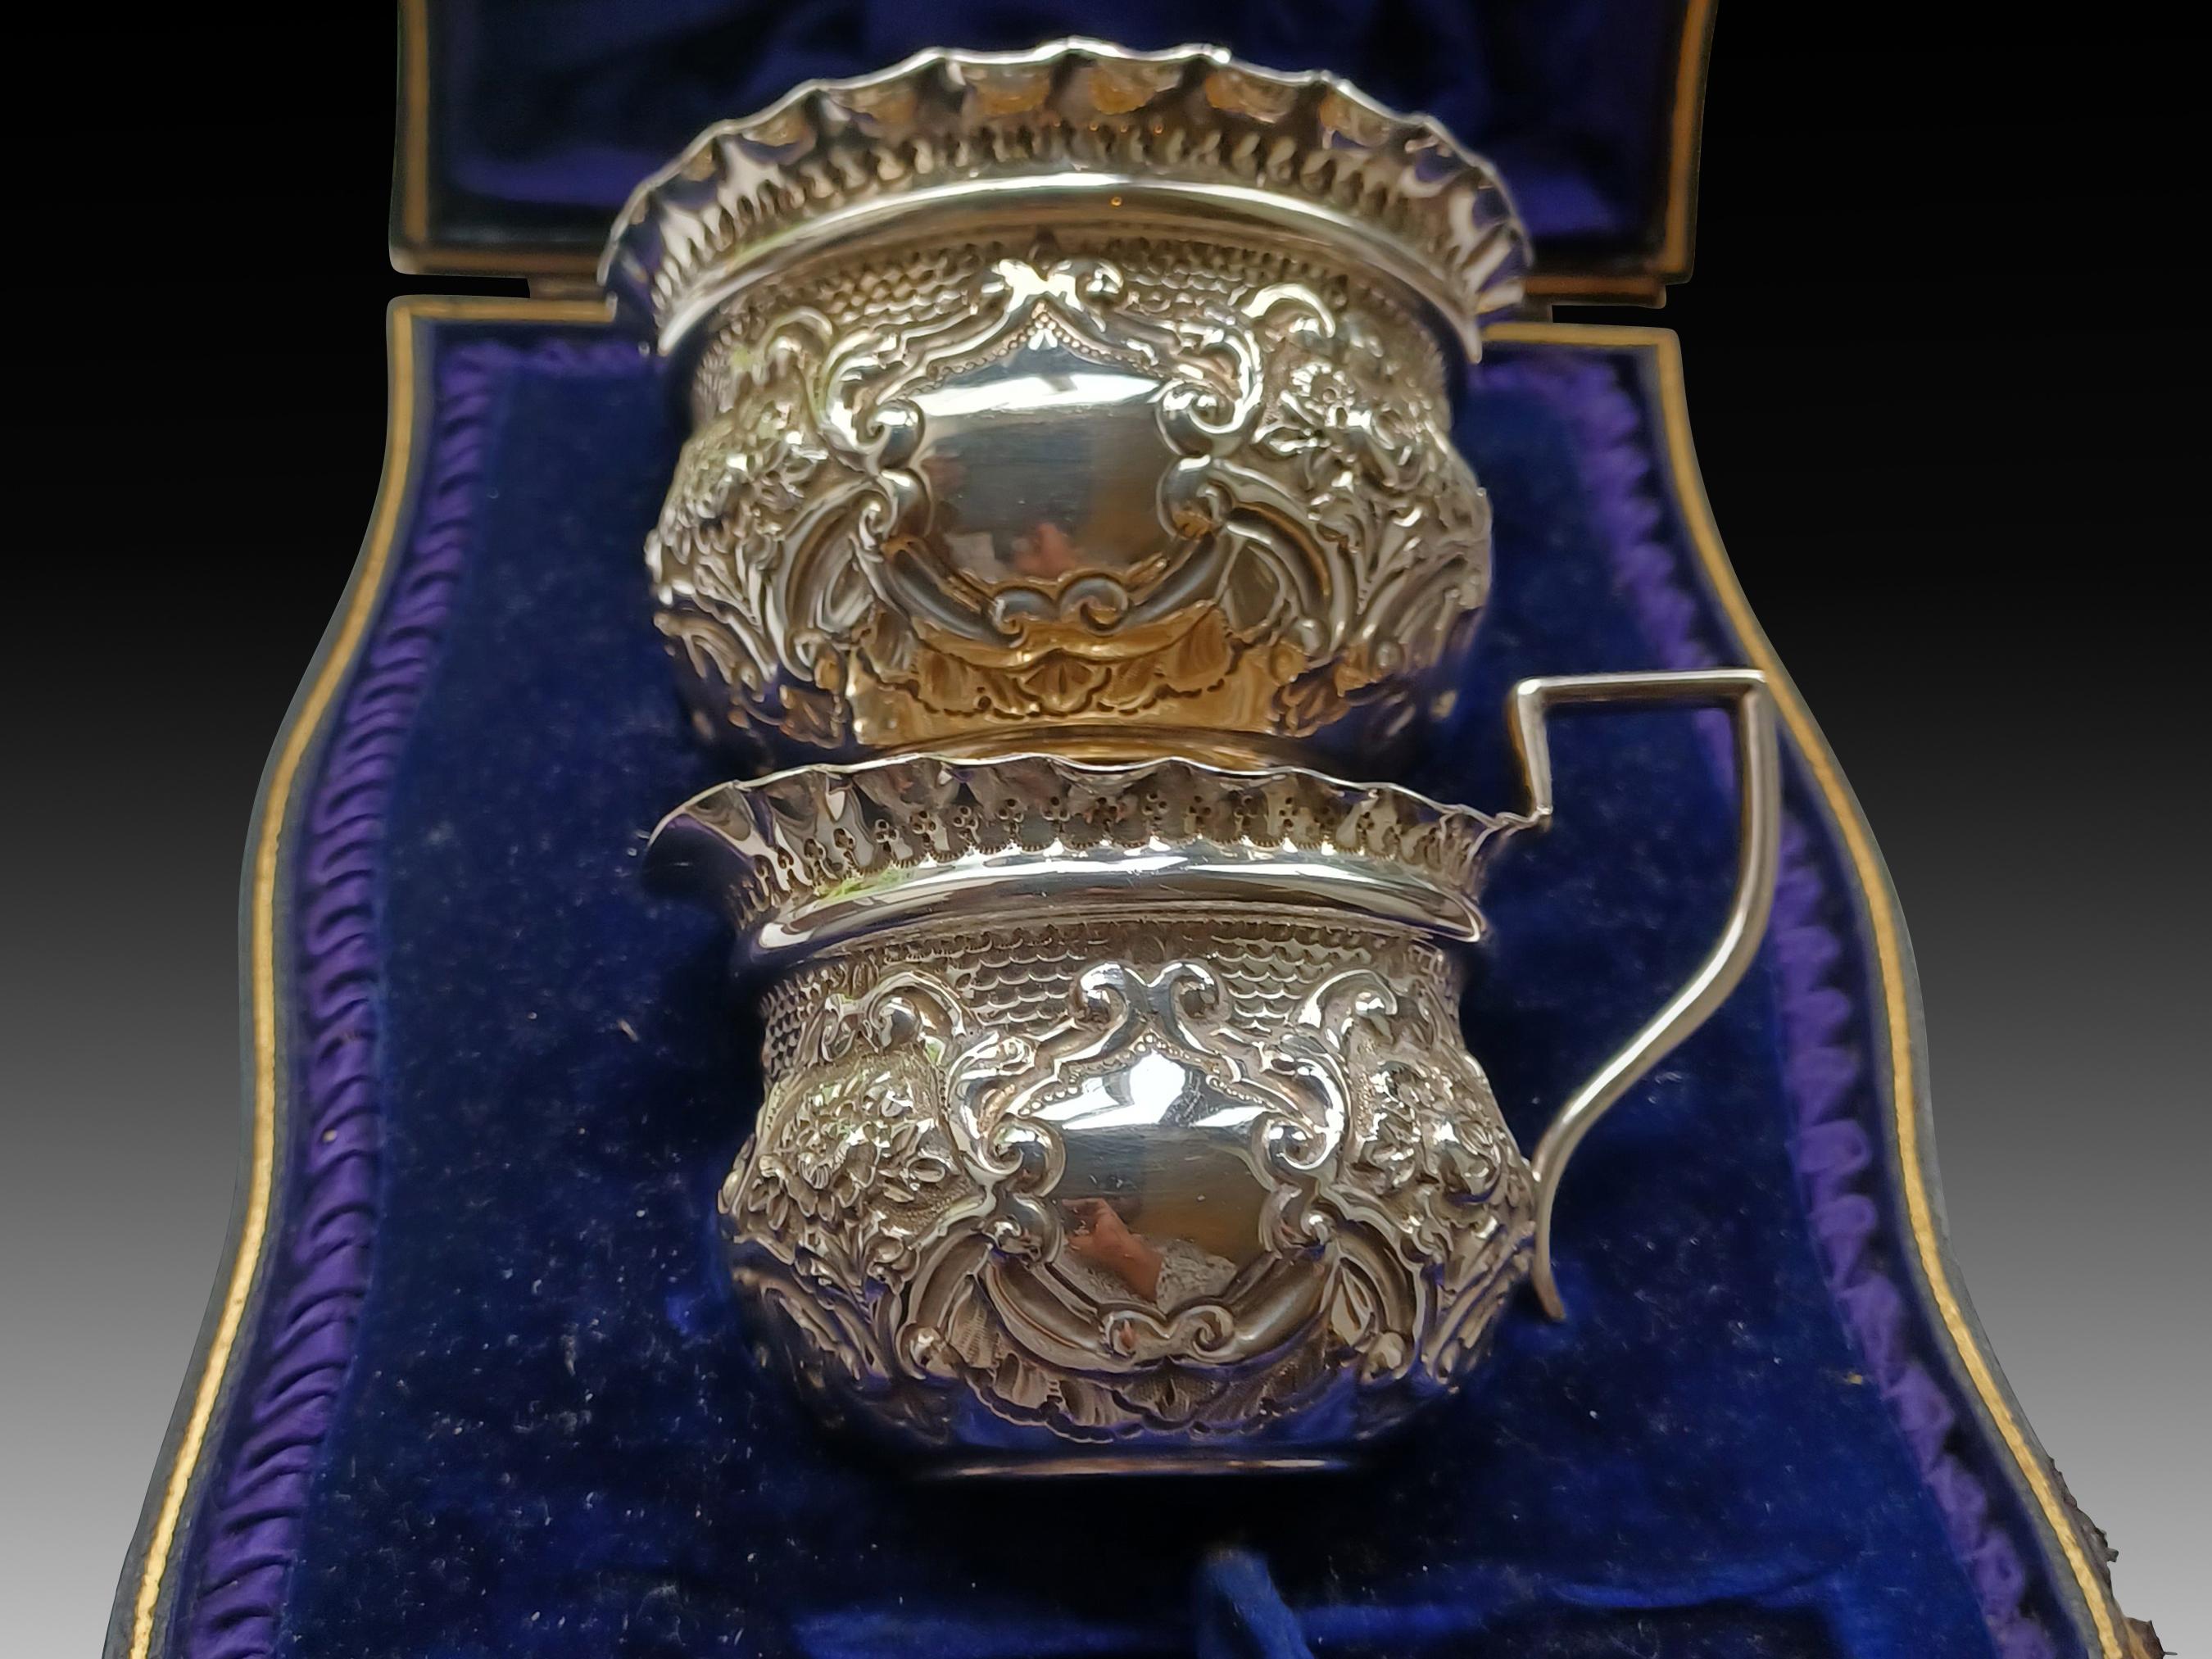 Victorian Silver Sugar Bowl and Creamer with Foliate Embossing in Original Case

Exquisite specimens of the late Victorian age of decadence embossed with foliate decoration and silver cased for serving sugar and cream to guests.

During the